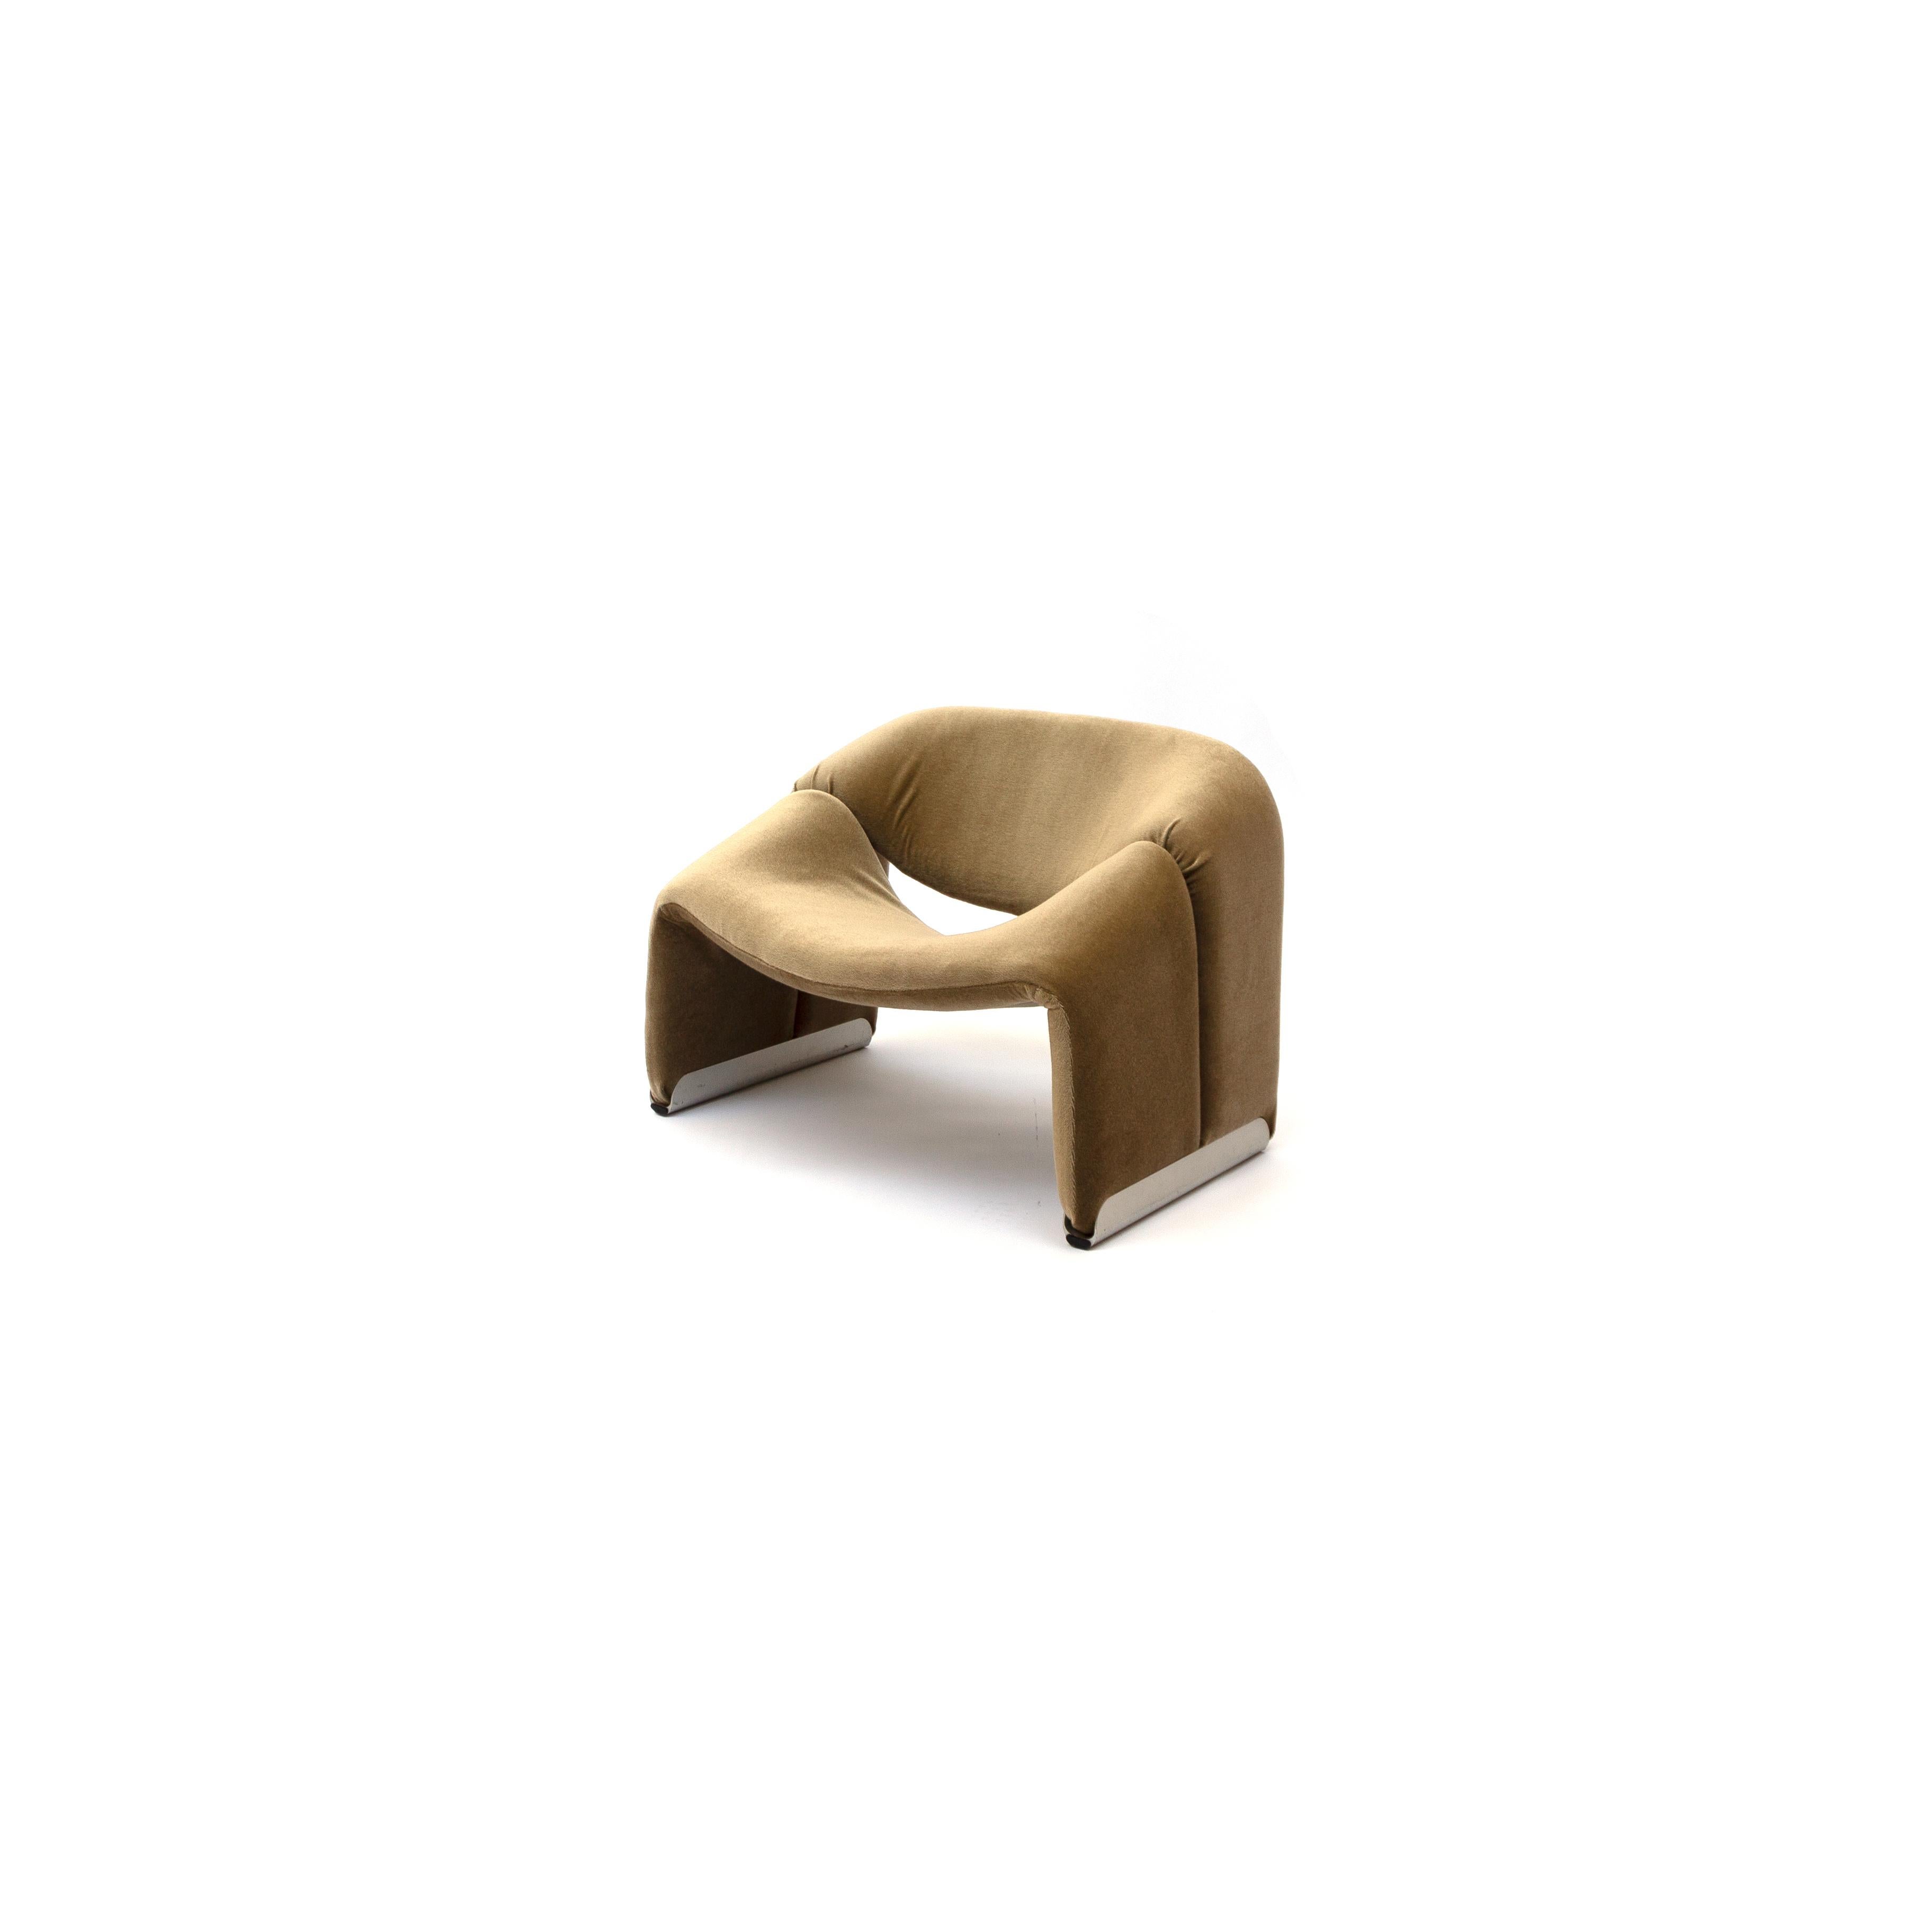 The groovy chair – or F598 – was designed by France’s top designer Pierre Paulin for Holland’s most Avant Garde furniture maker Artifort. Their compactness combined with great comfort and of course iconic looks made this chair one of the stars of